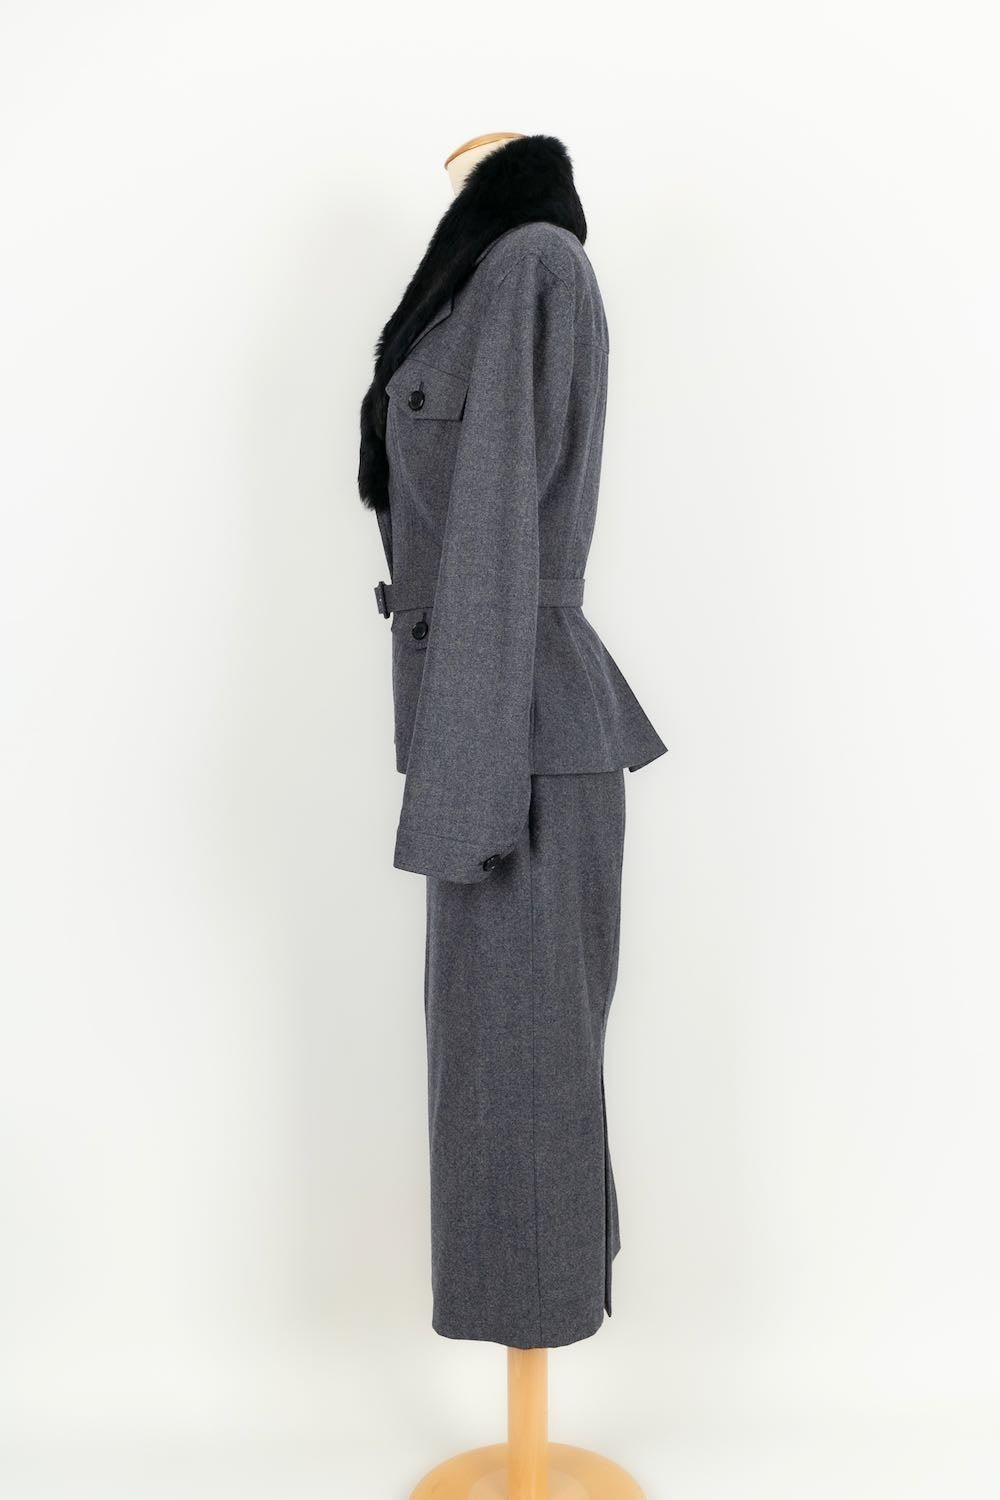 Alexander McQueen Jacket, Skirt and Wool Pants 3 Pieces Set For Sale 7